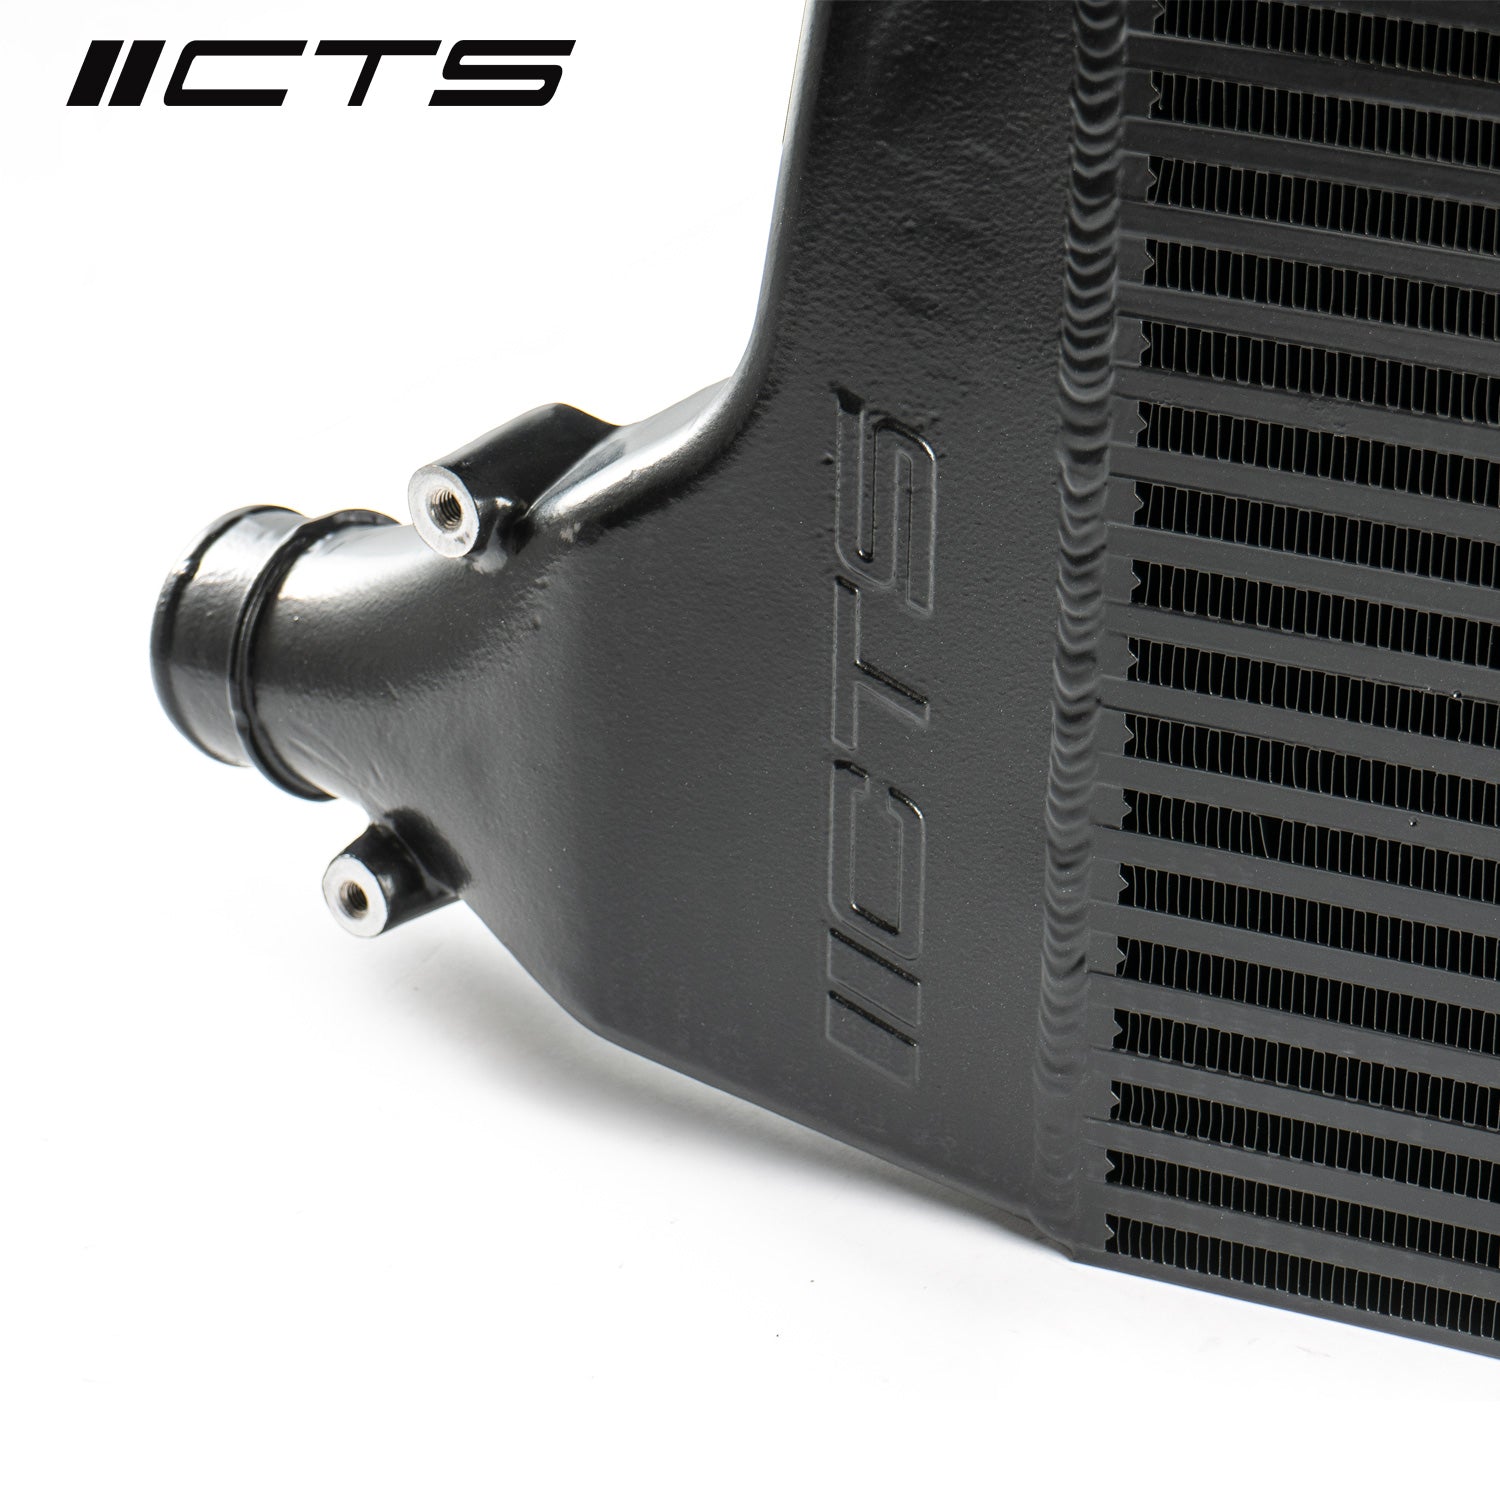 CTS TURBO B9 AUDI A4, A5, ALLROAD 1.8T/2.0T AND B9 AUDI S4, S5 3.0T UPGRADED INTERCOOLER (DIRECT FIT) - 0